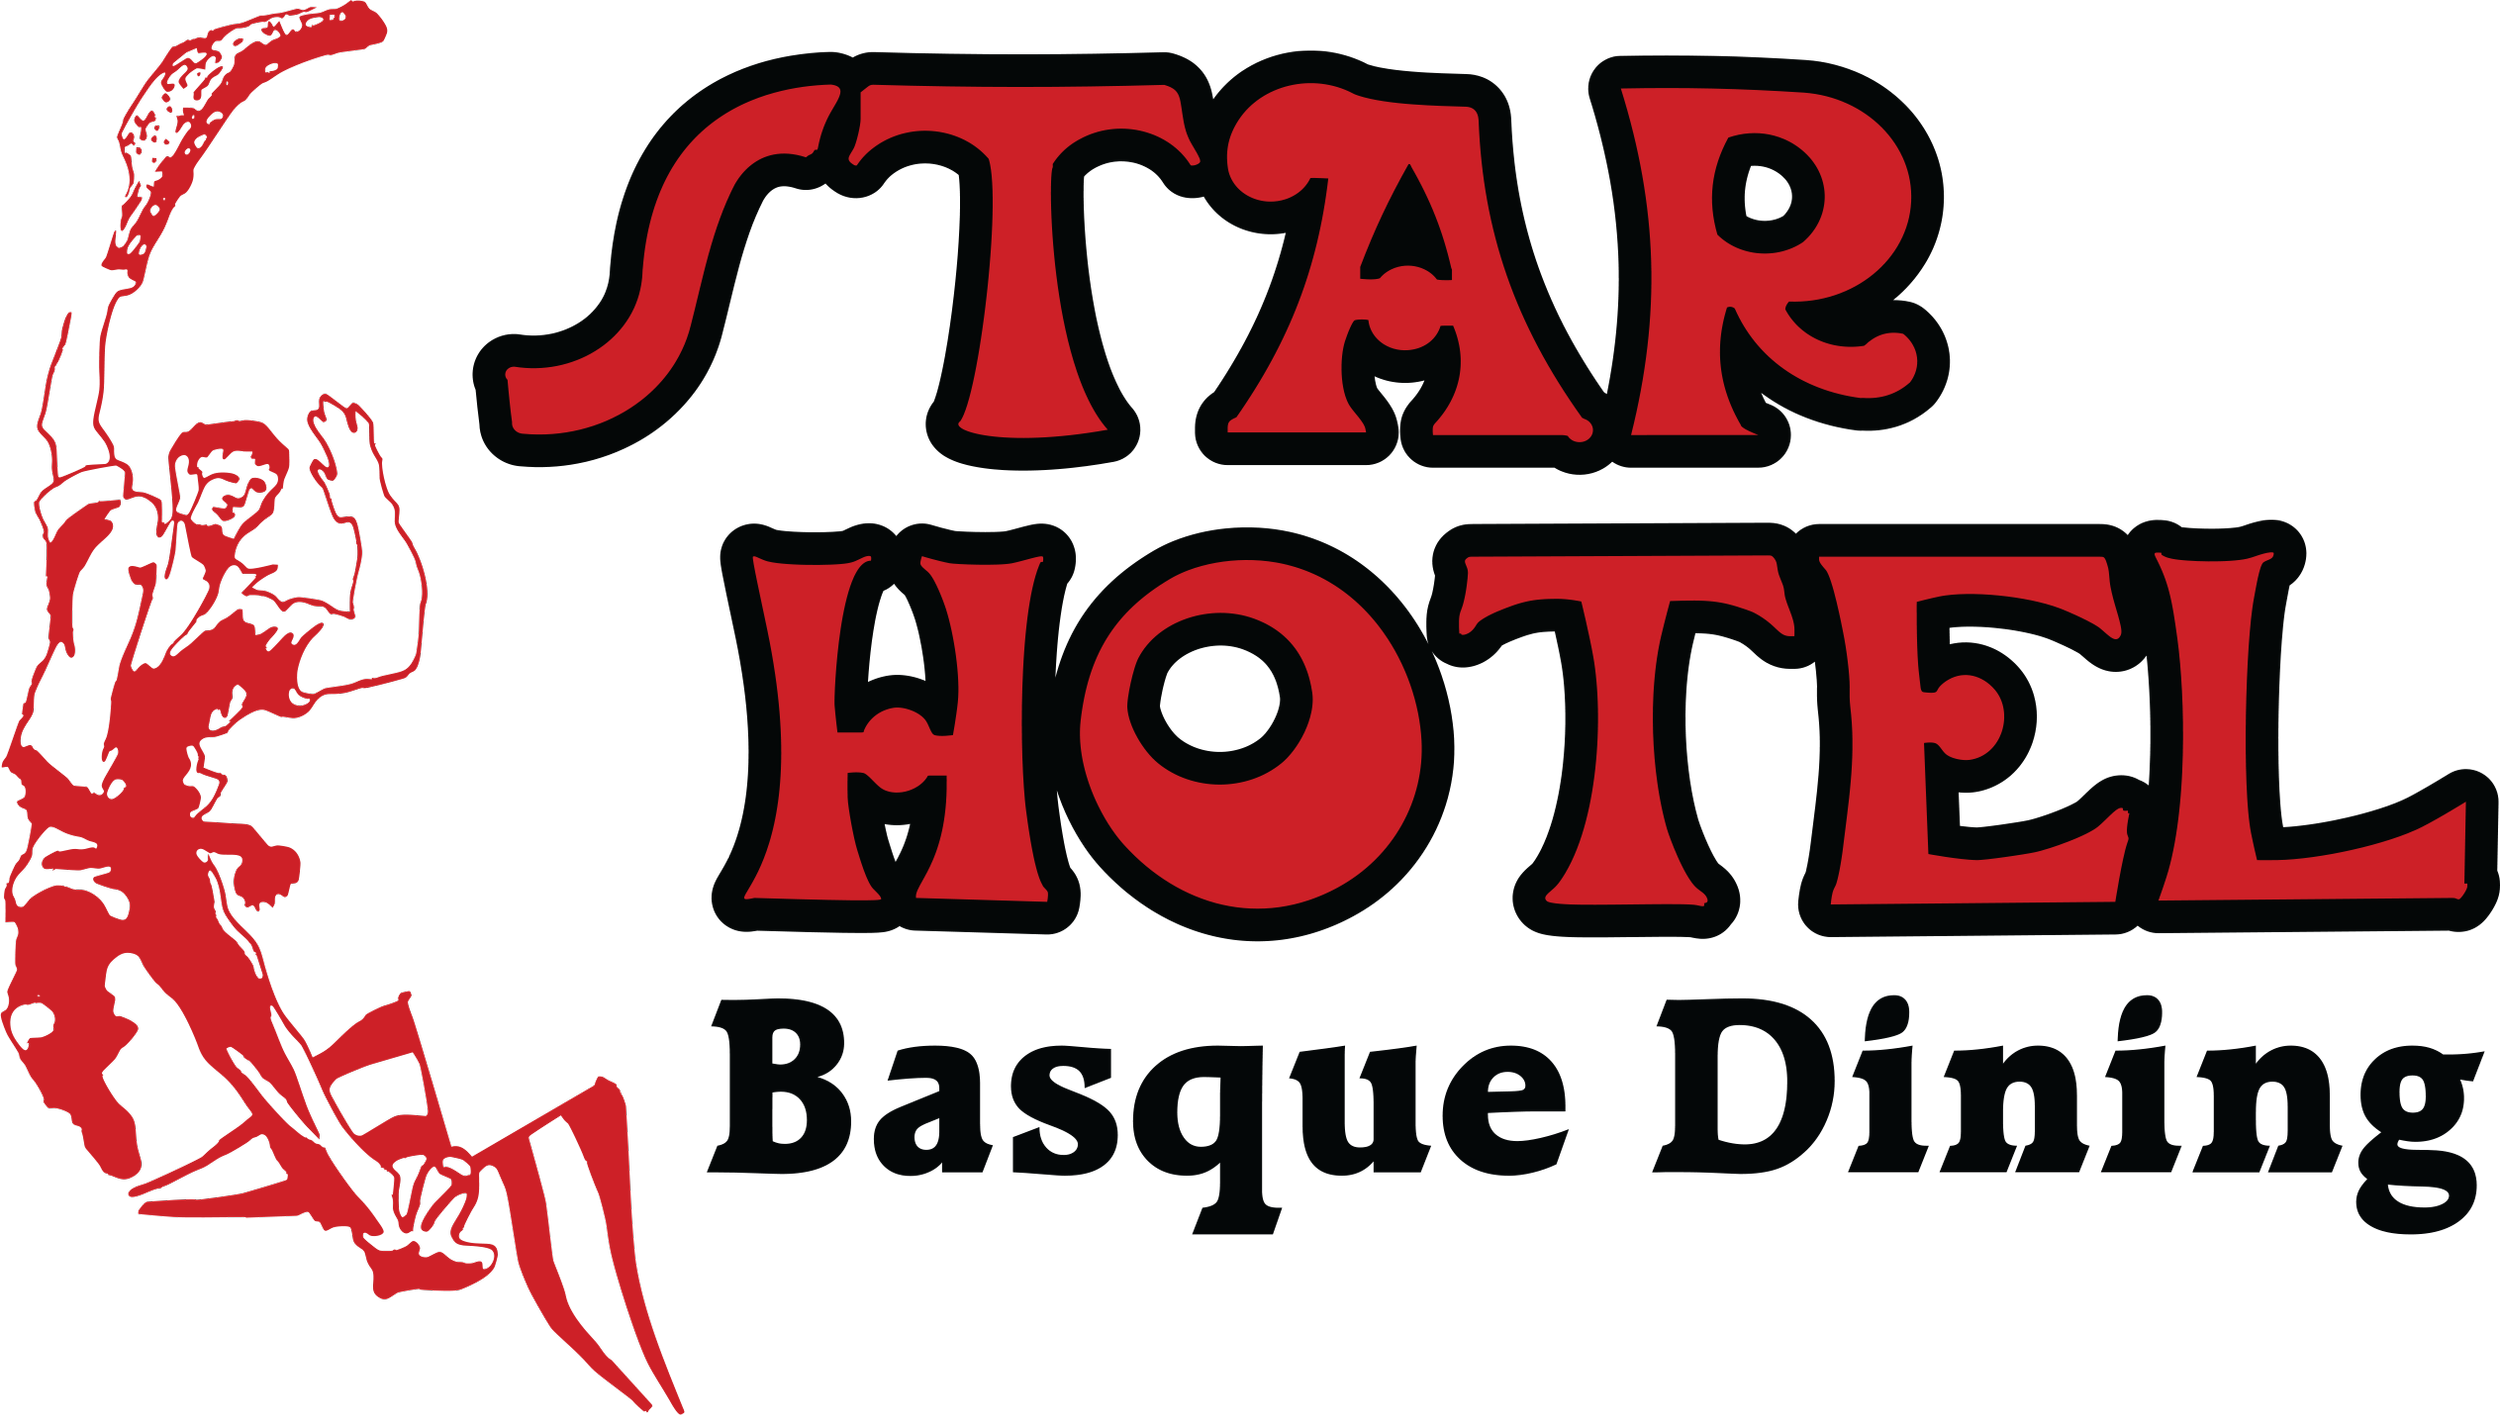 The Star Hotel Restaurant and Bar